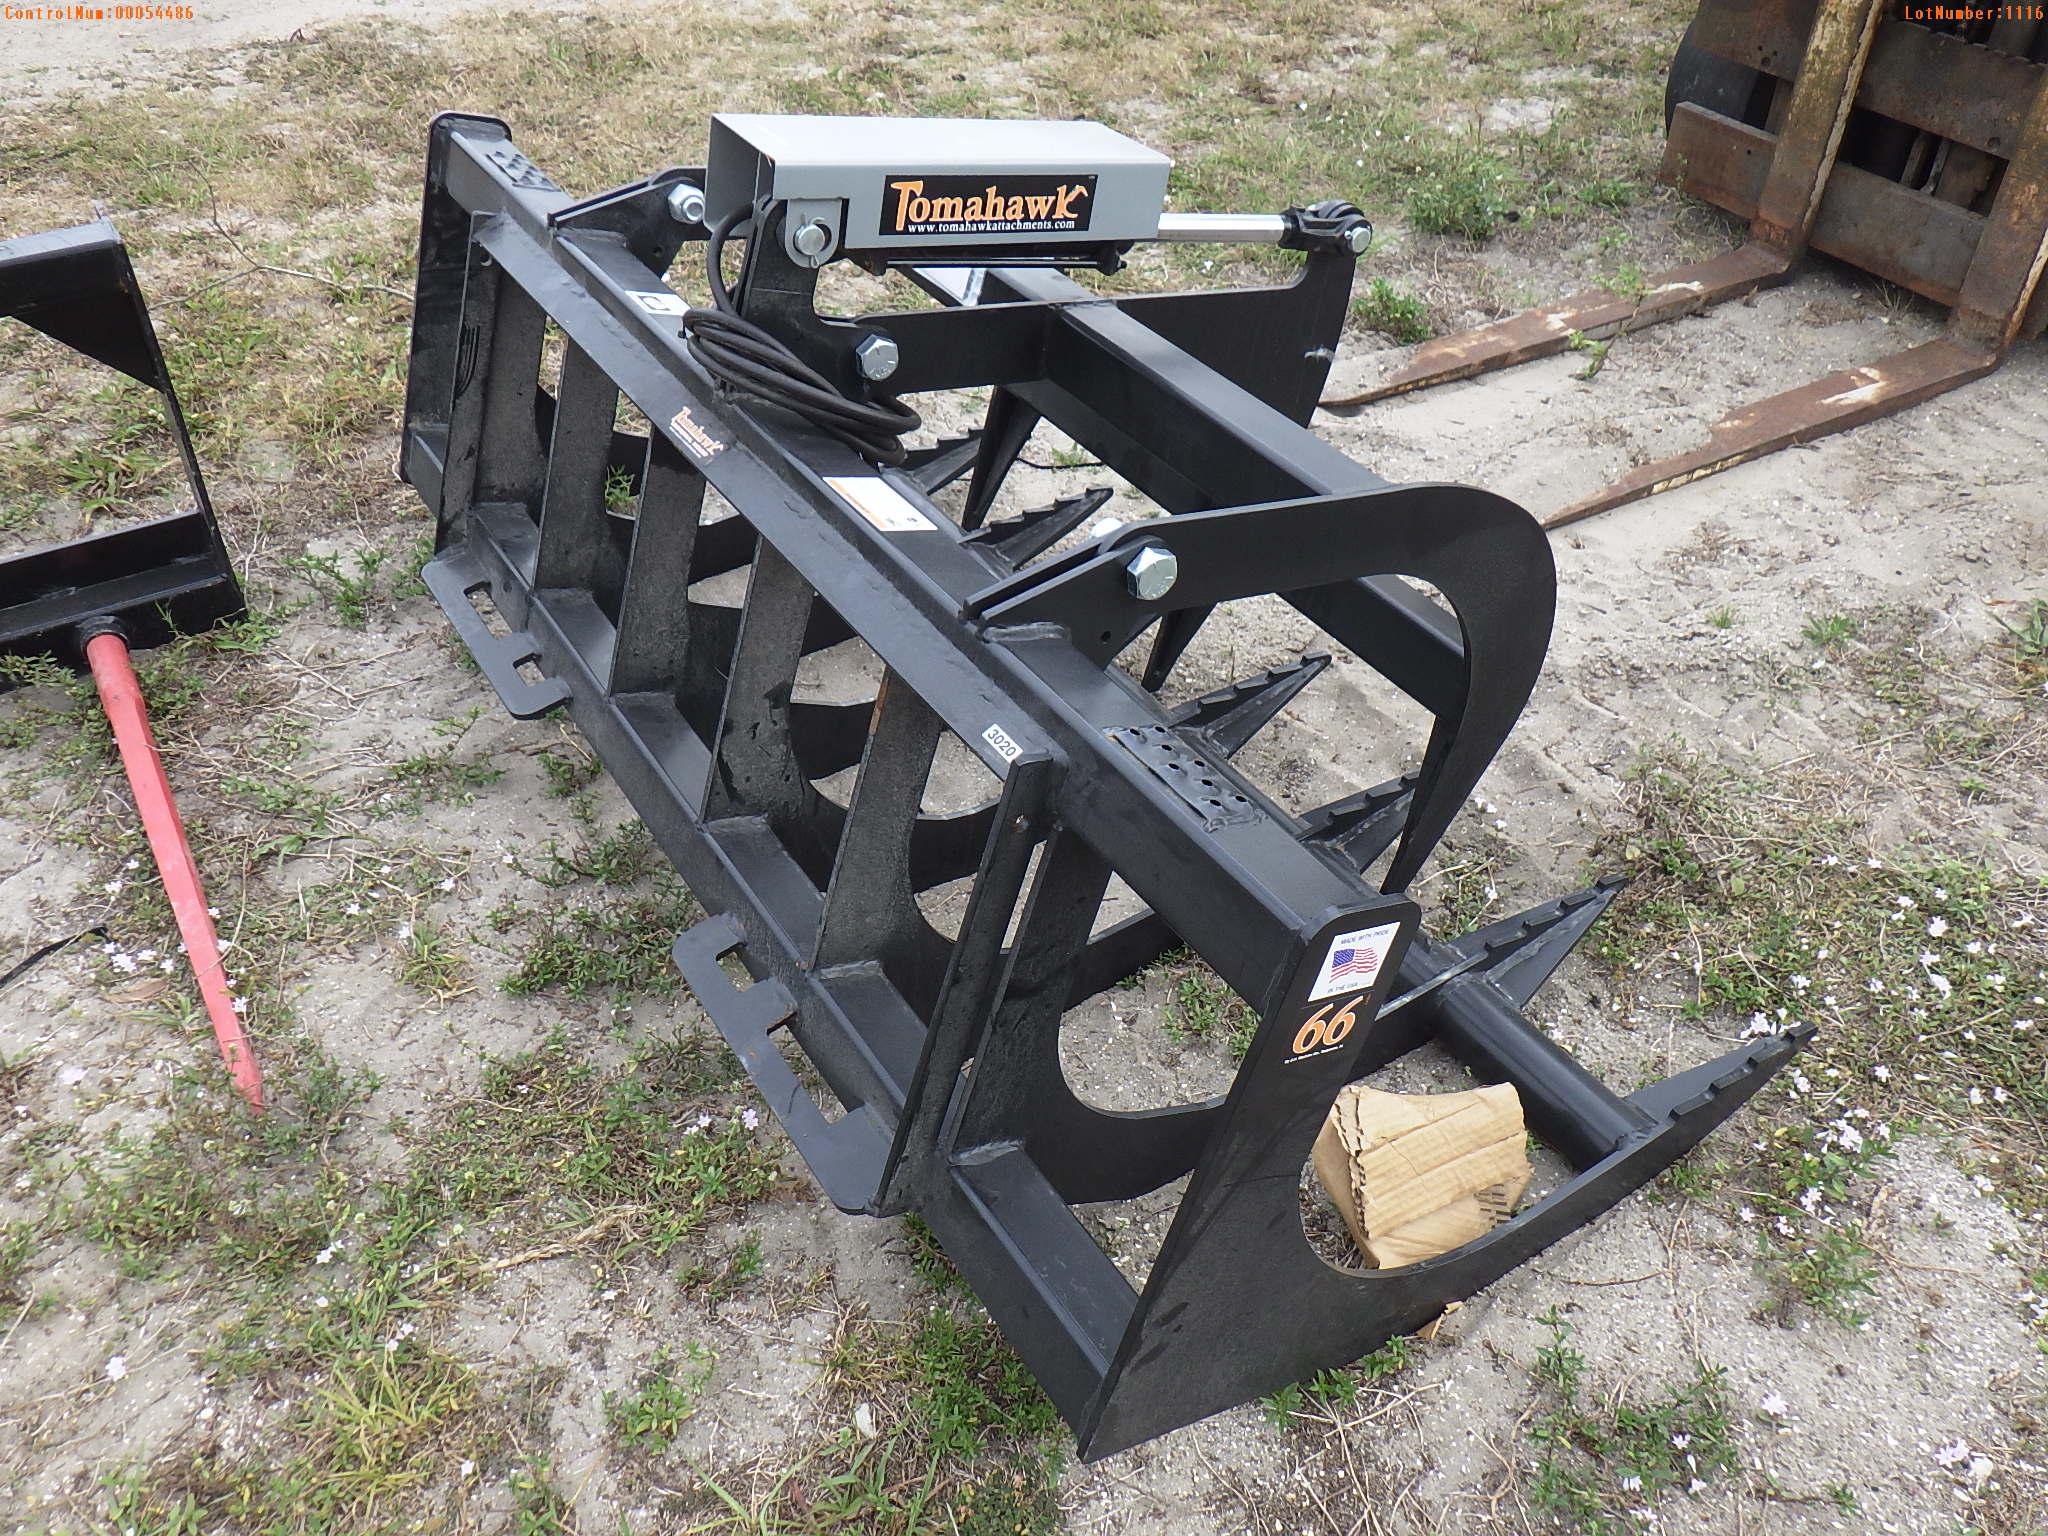 4-01116 (Equip.-Implement misc.)  Seller:Private/Dealer TOMAHAWK 66 INCH GRAPPLE